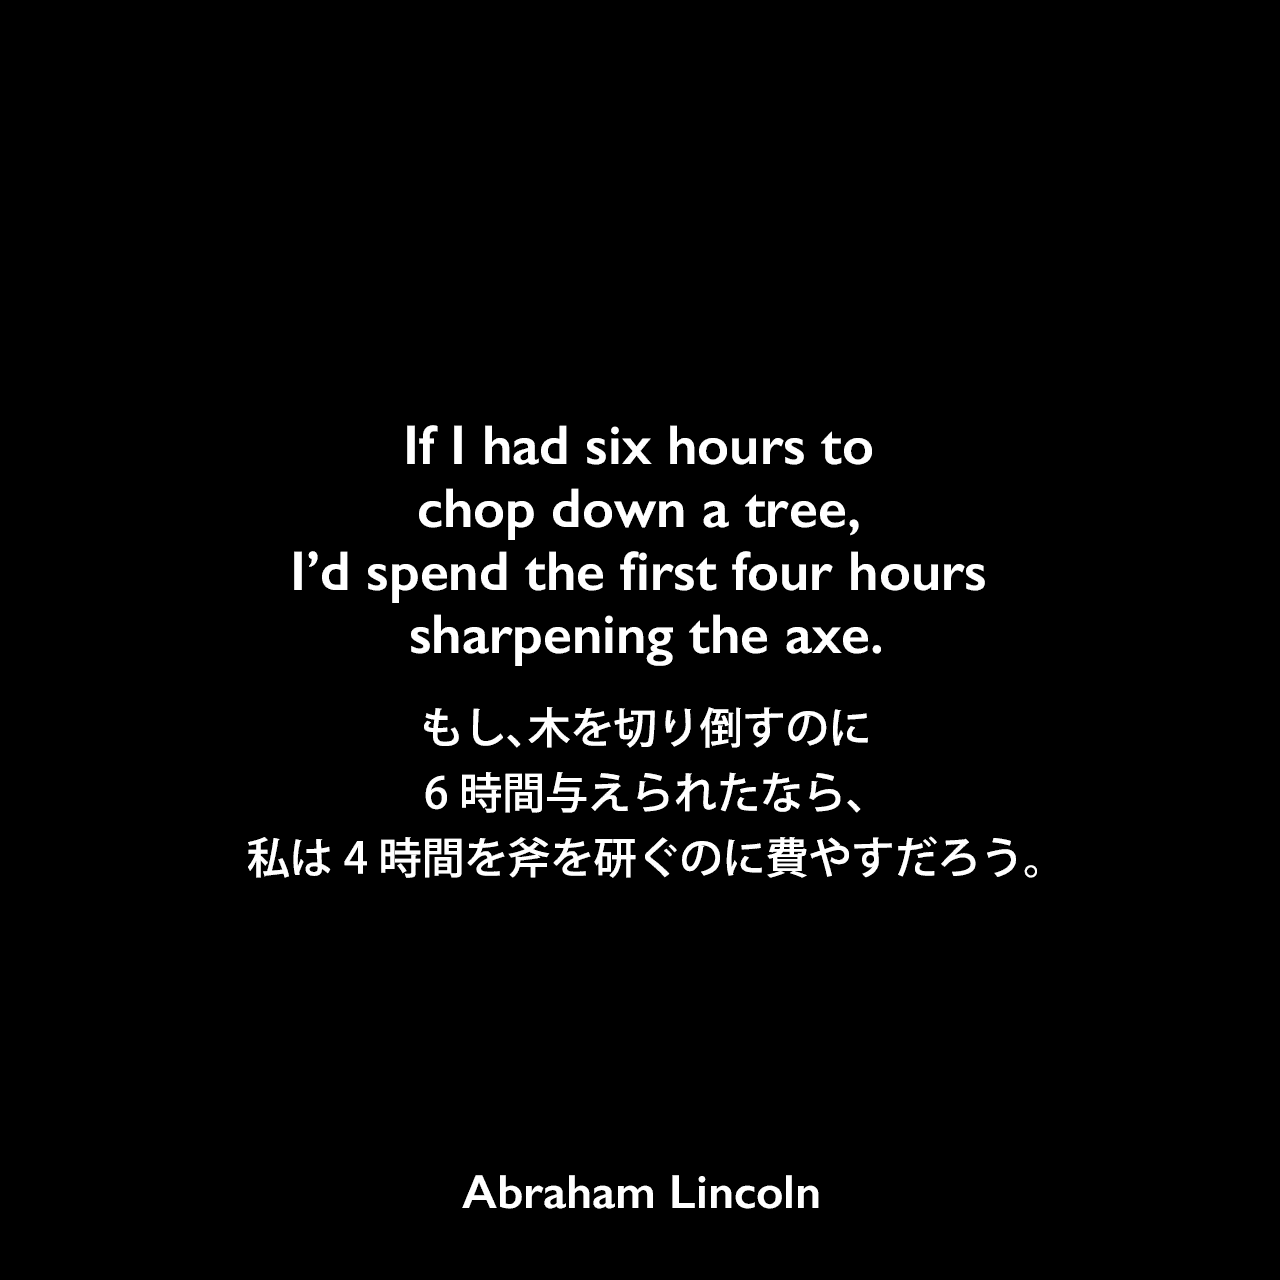 If I had six hours to chop down a tree, I’d spend the first four hours sharpening the axe.もし、木を切り倒すのに8時間与えられたなら、私は６時間を斧を研ぐのに費やすだろう。Abraham Lincoln